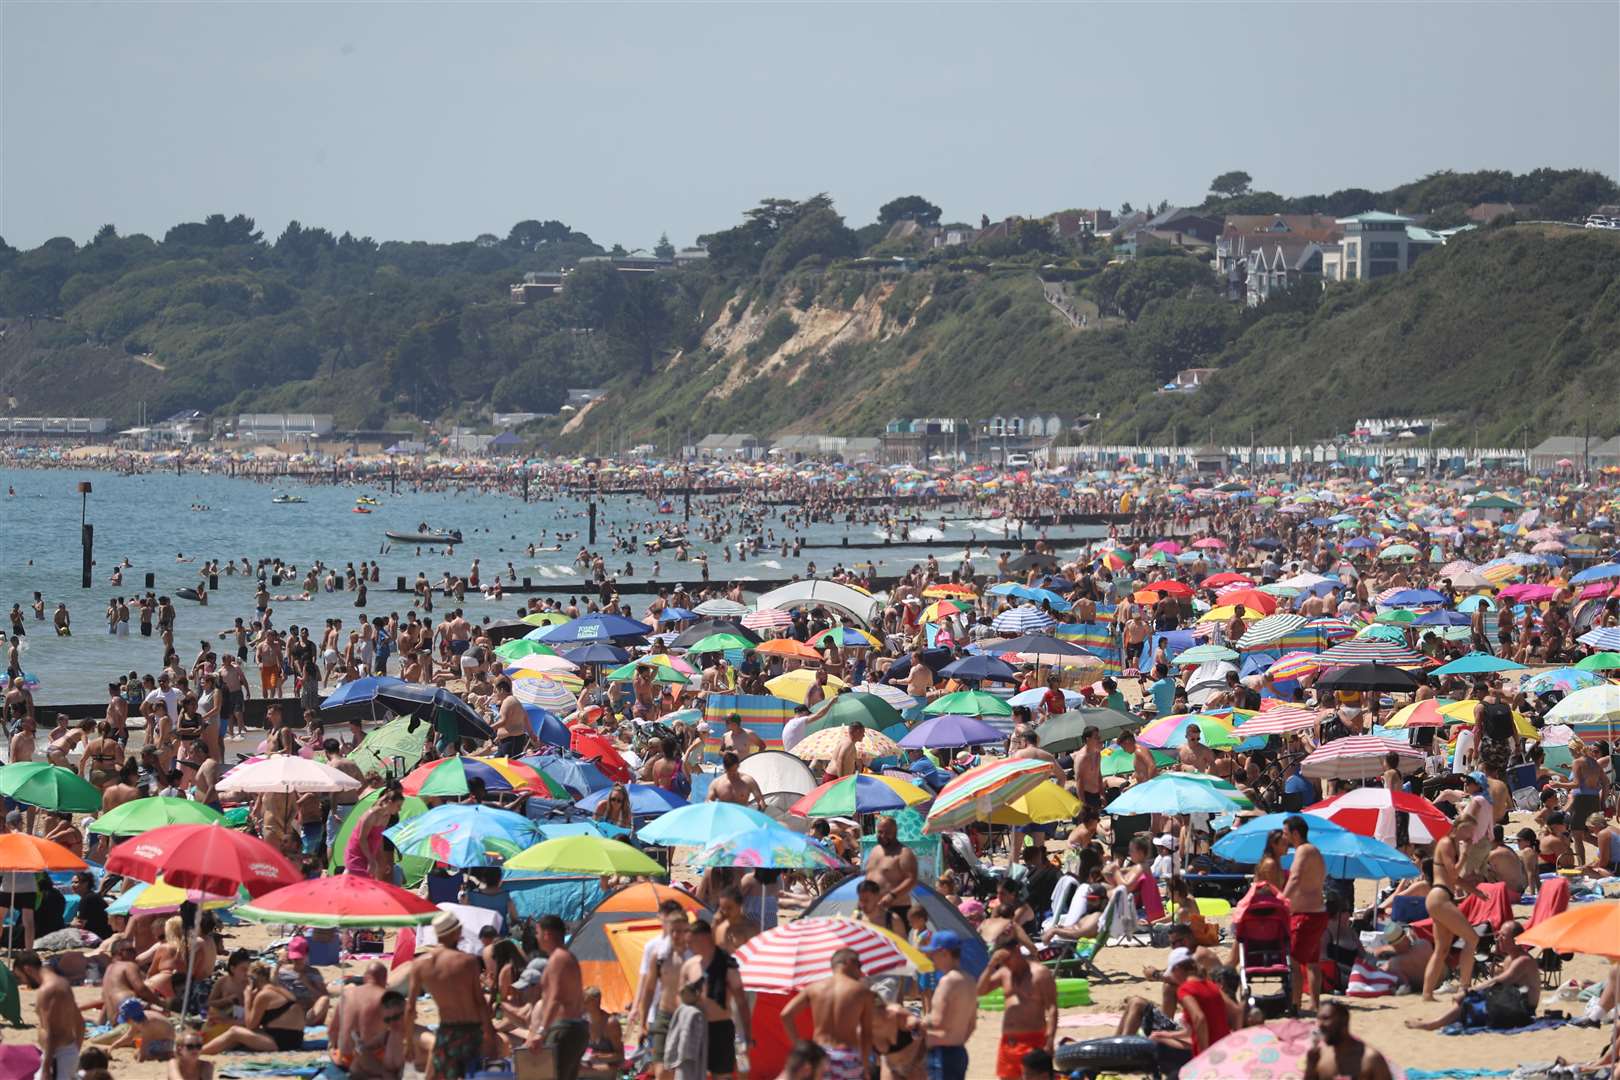 Bournemouth beach was packed once again as sunseekers made the most of the good weather (Andrew Matthews/PA)